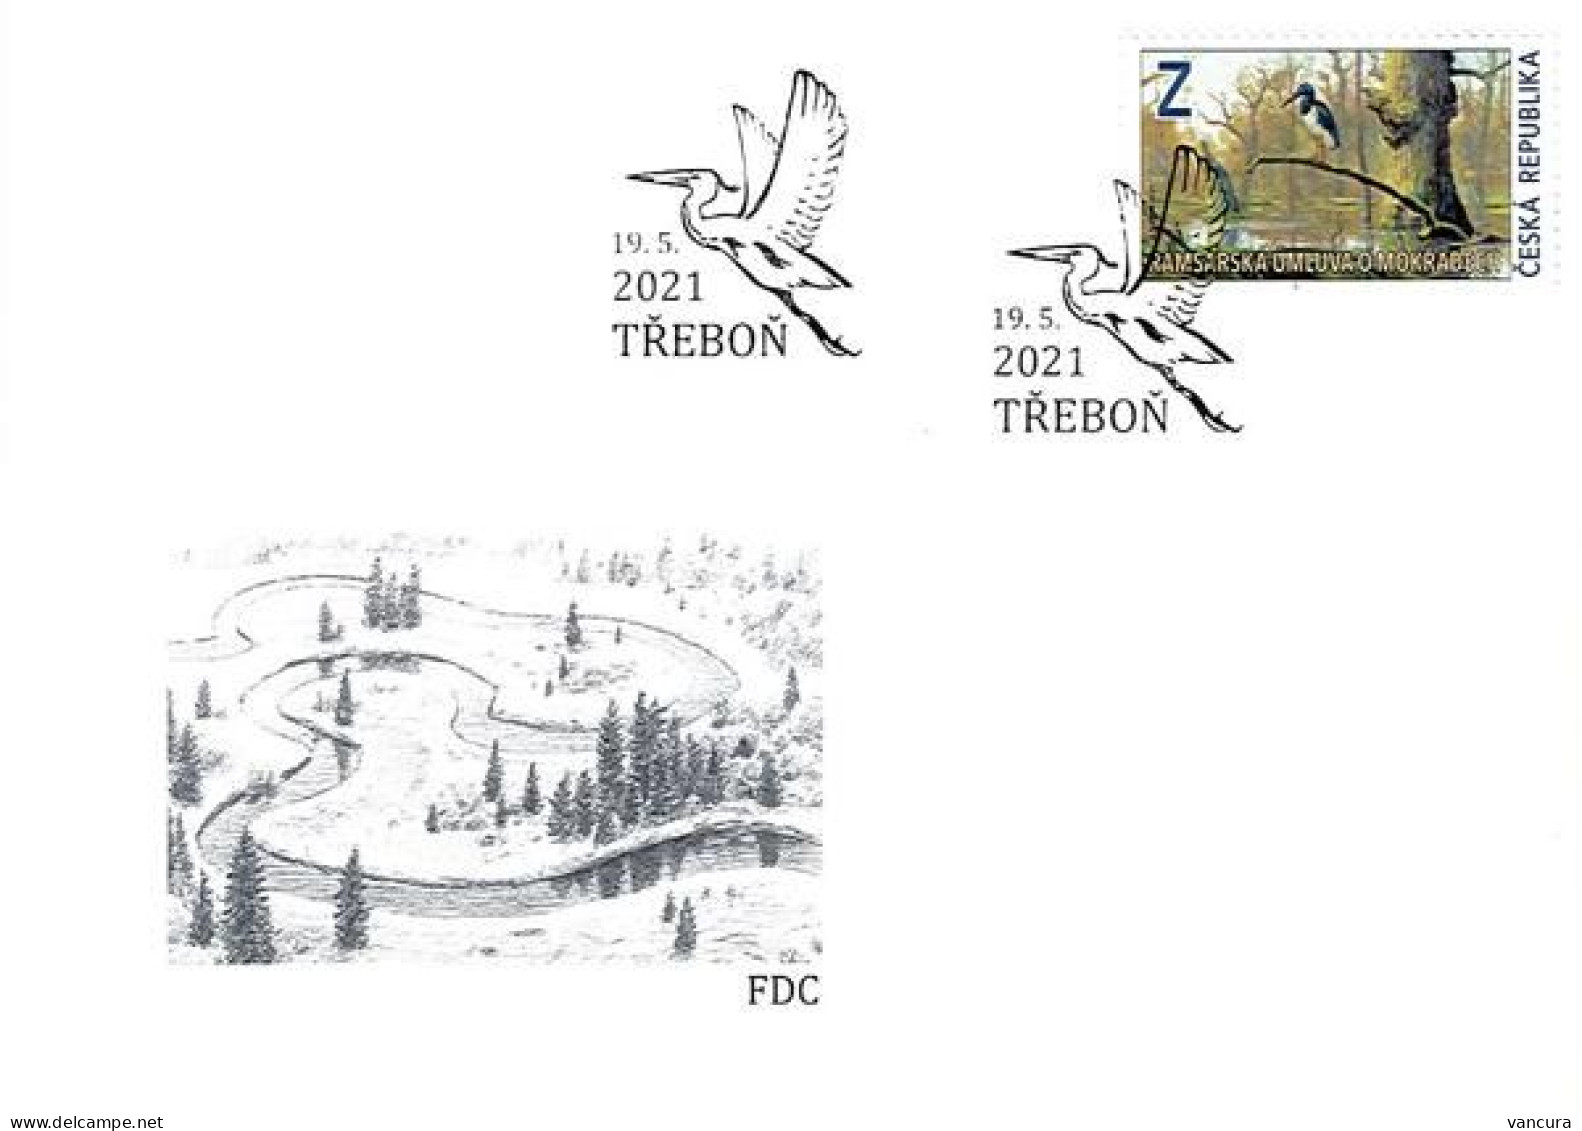 FDC 1120 Czech Republic Ramsars Agreement About Protection Of Wetlands 2021 Black Stork - Storks & Long-legged Wading Birds